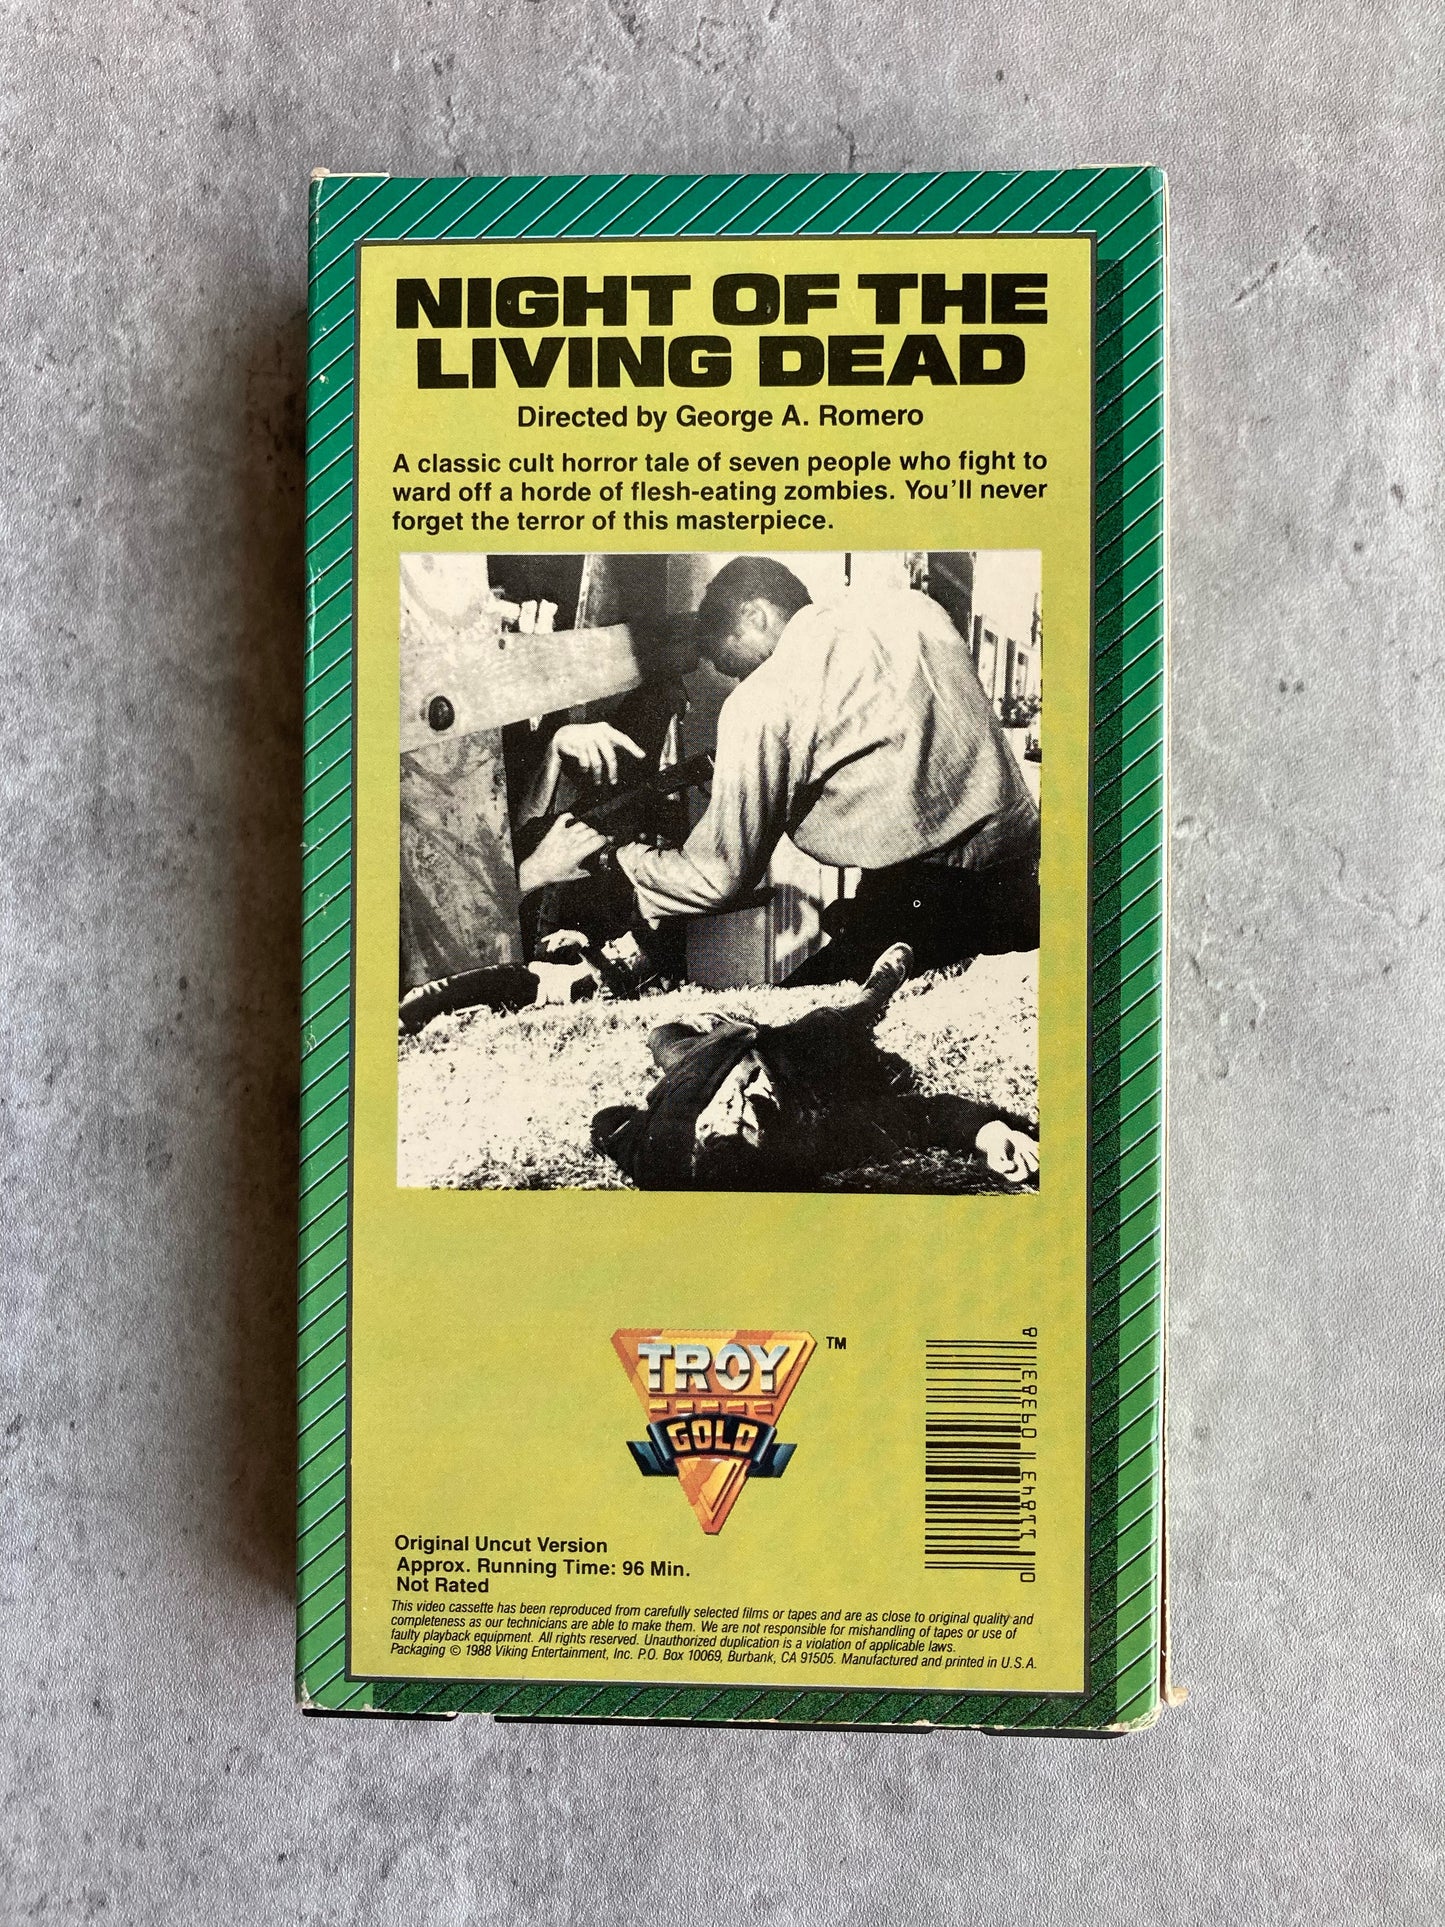 Back cover of The Night of the Living Dead VHS. Shop for VHS and books with The Stone Circle, the only online bookstore near you.